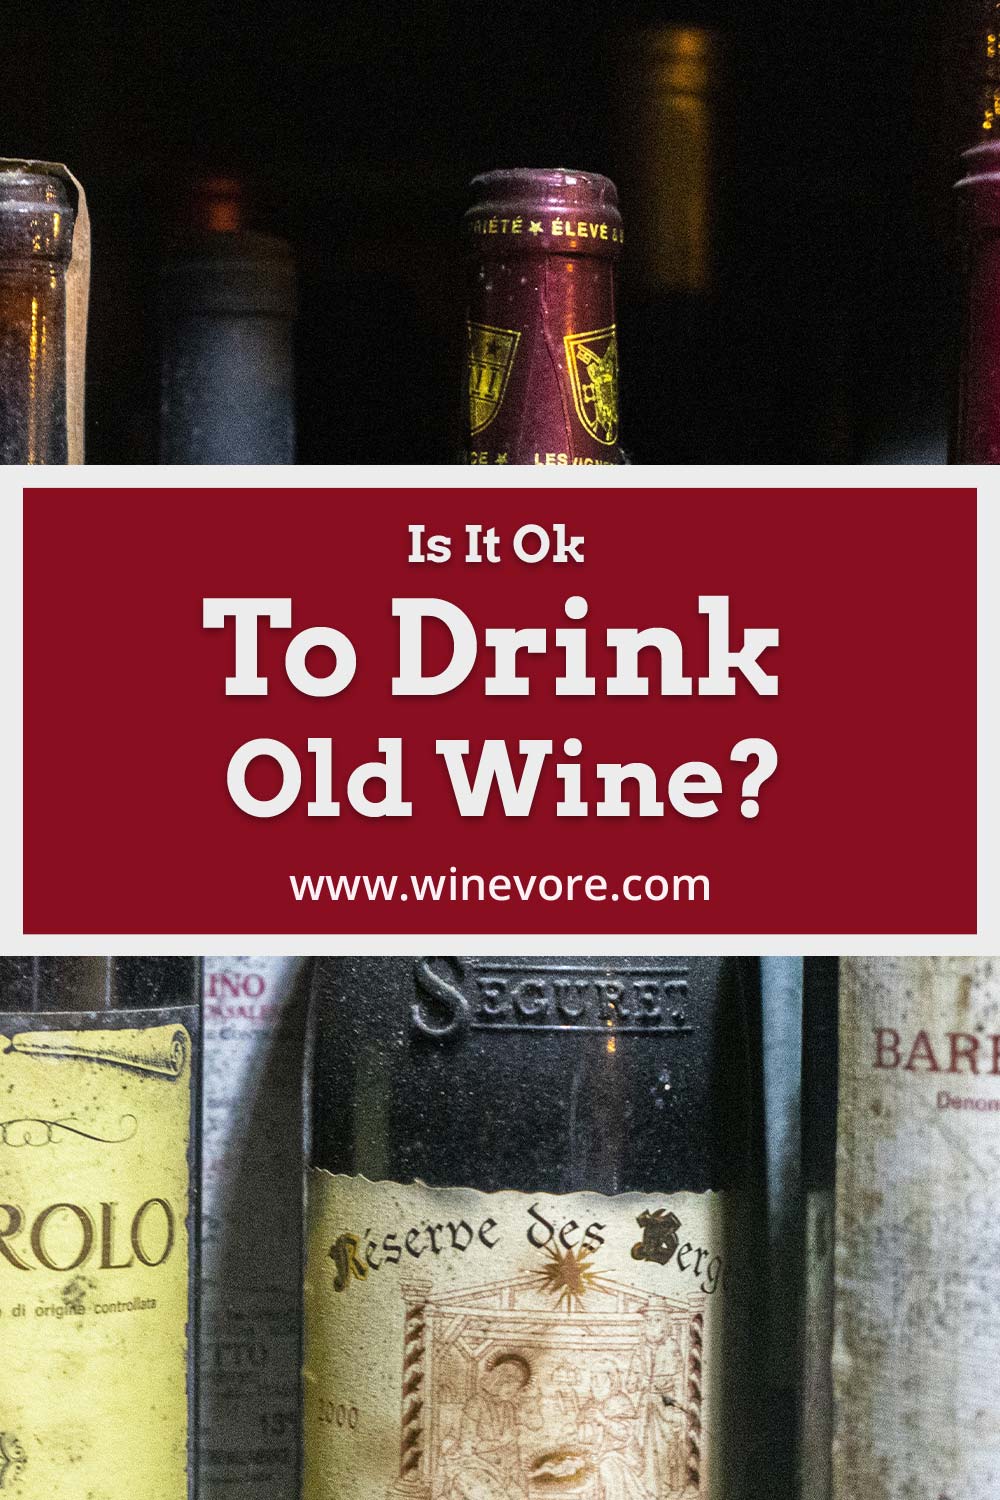 Sealed old wine bottles - Is it ok to drink them?